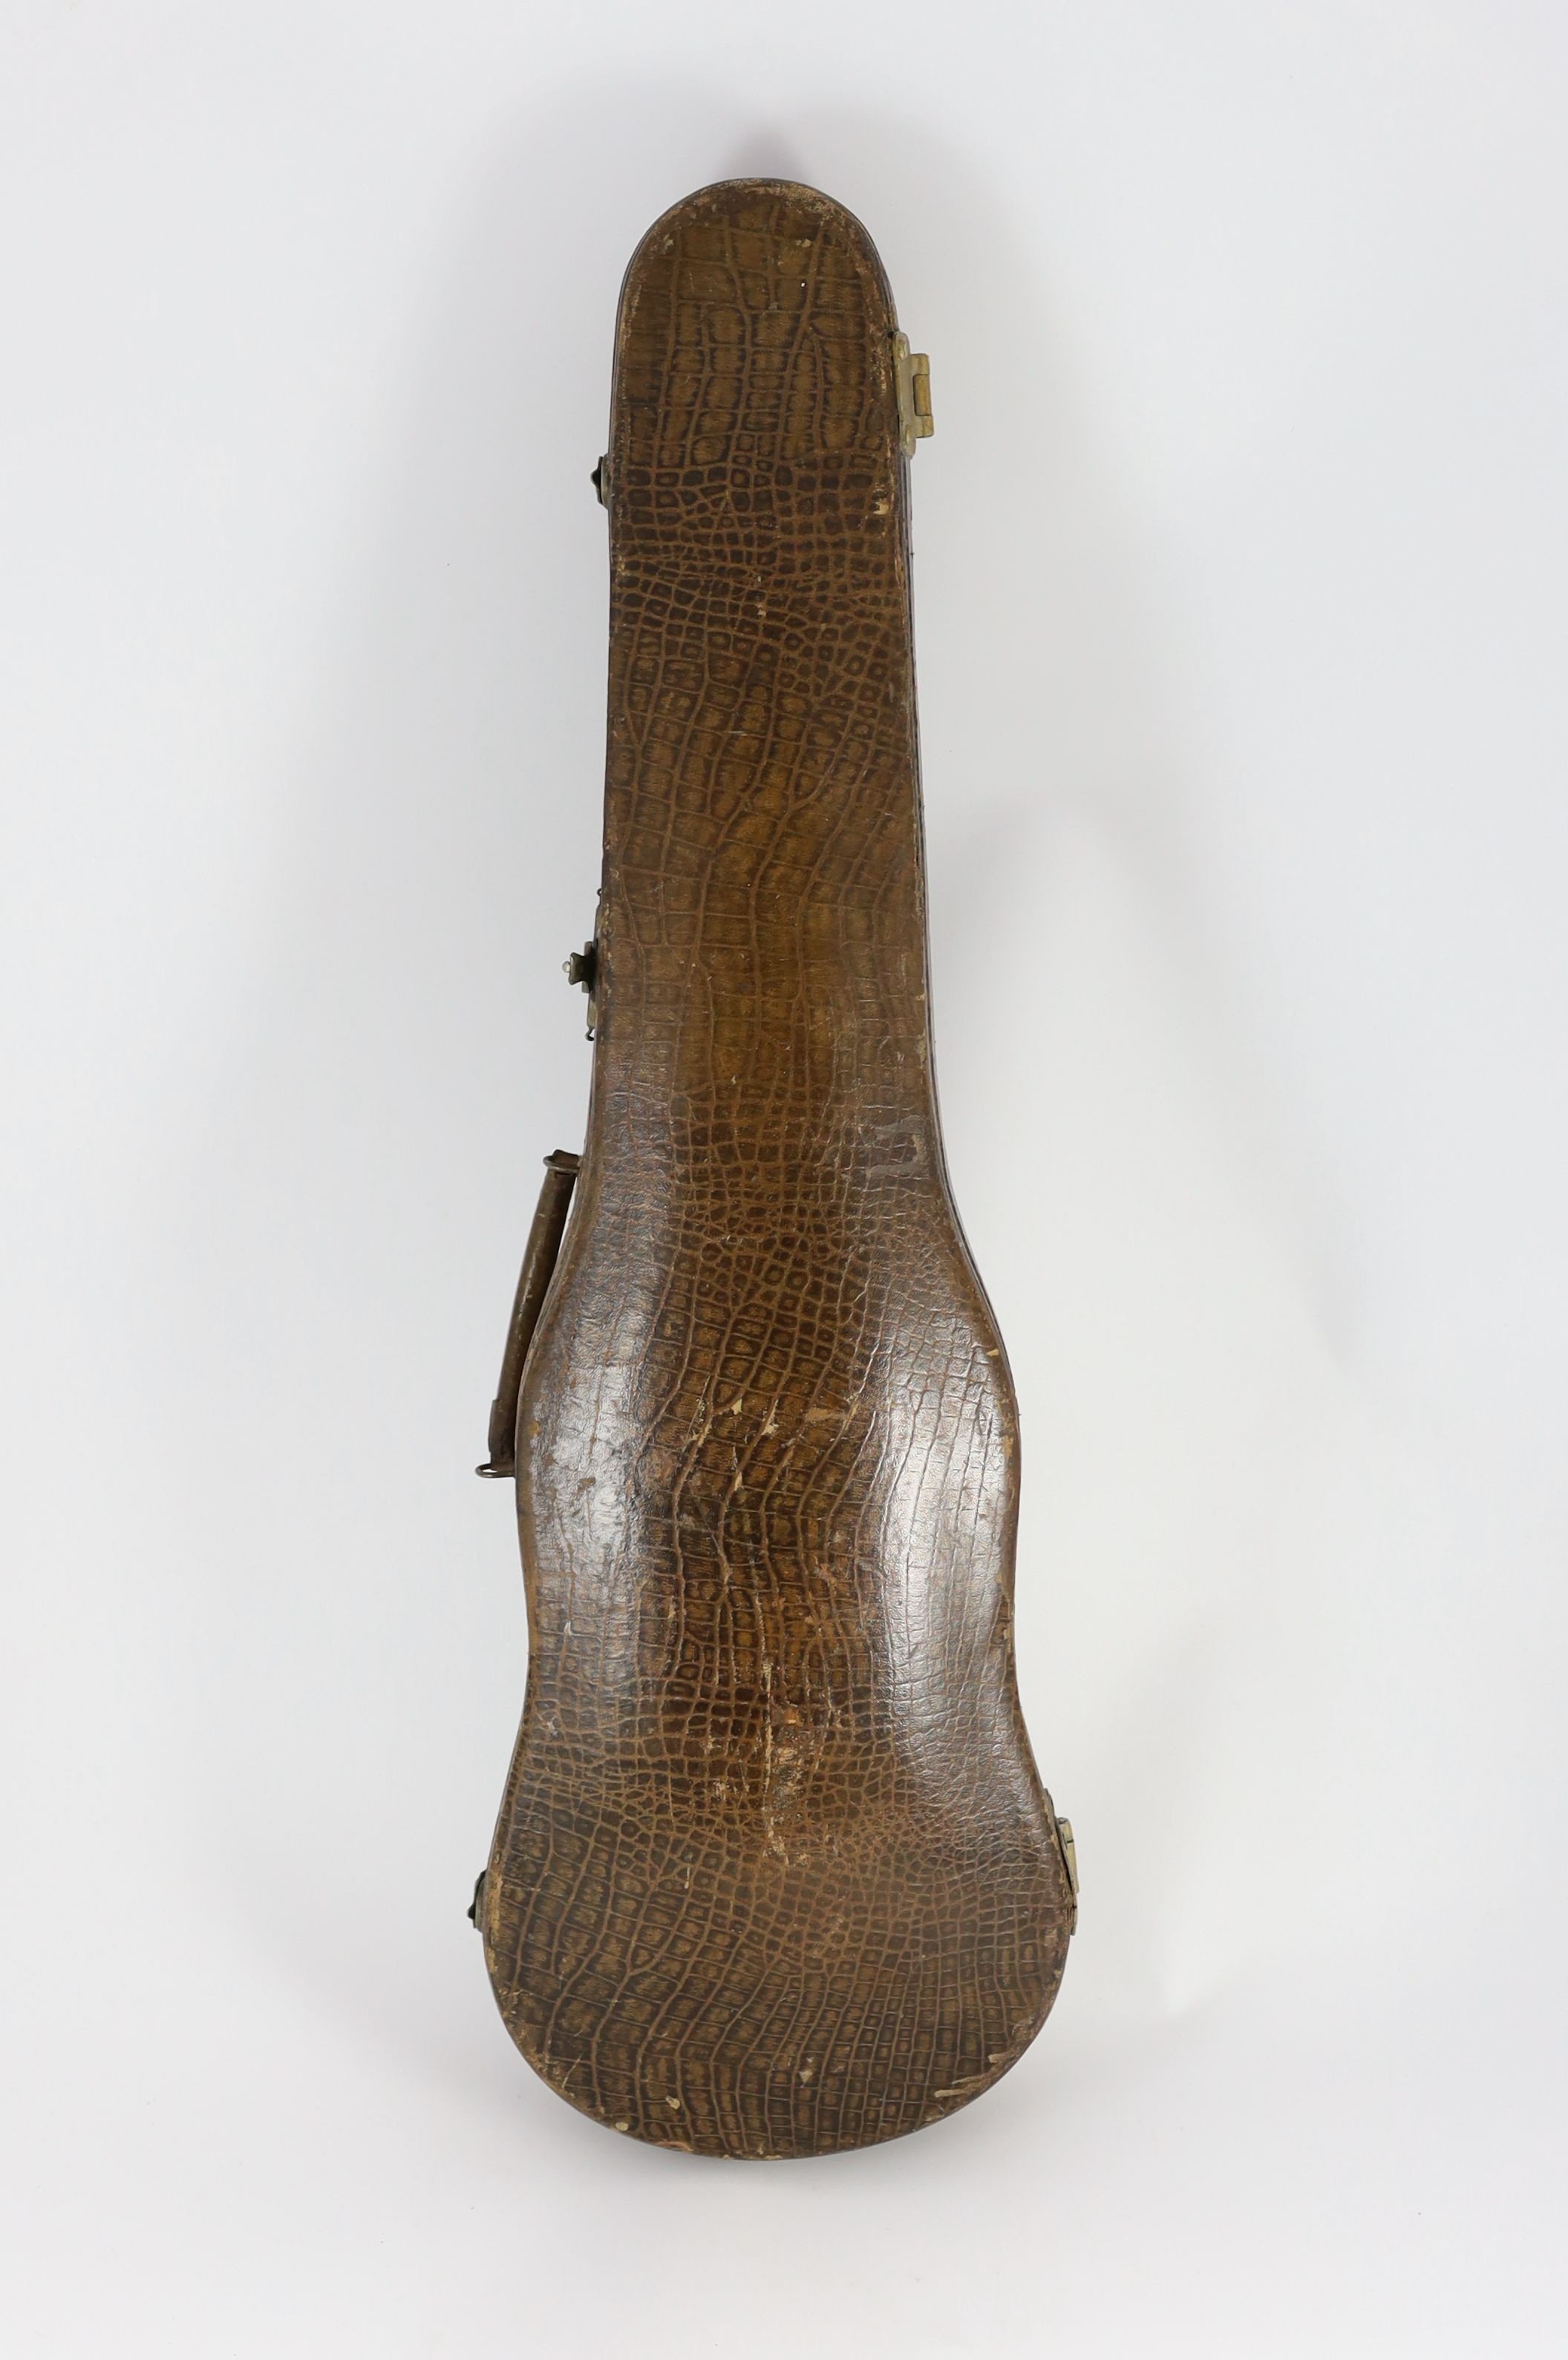 A Louis Lowendall Maggini violin, label inscribed and dated 1884, cased